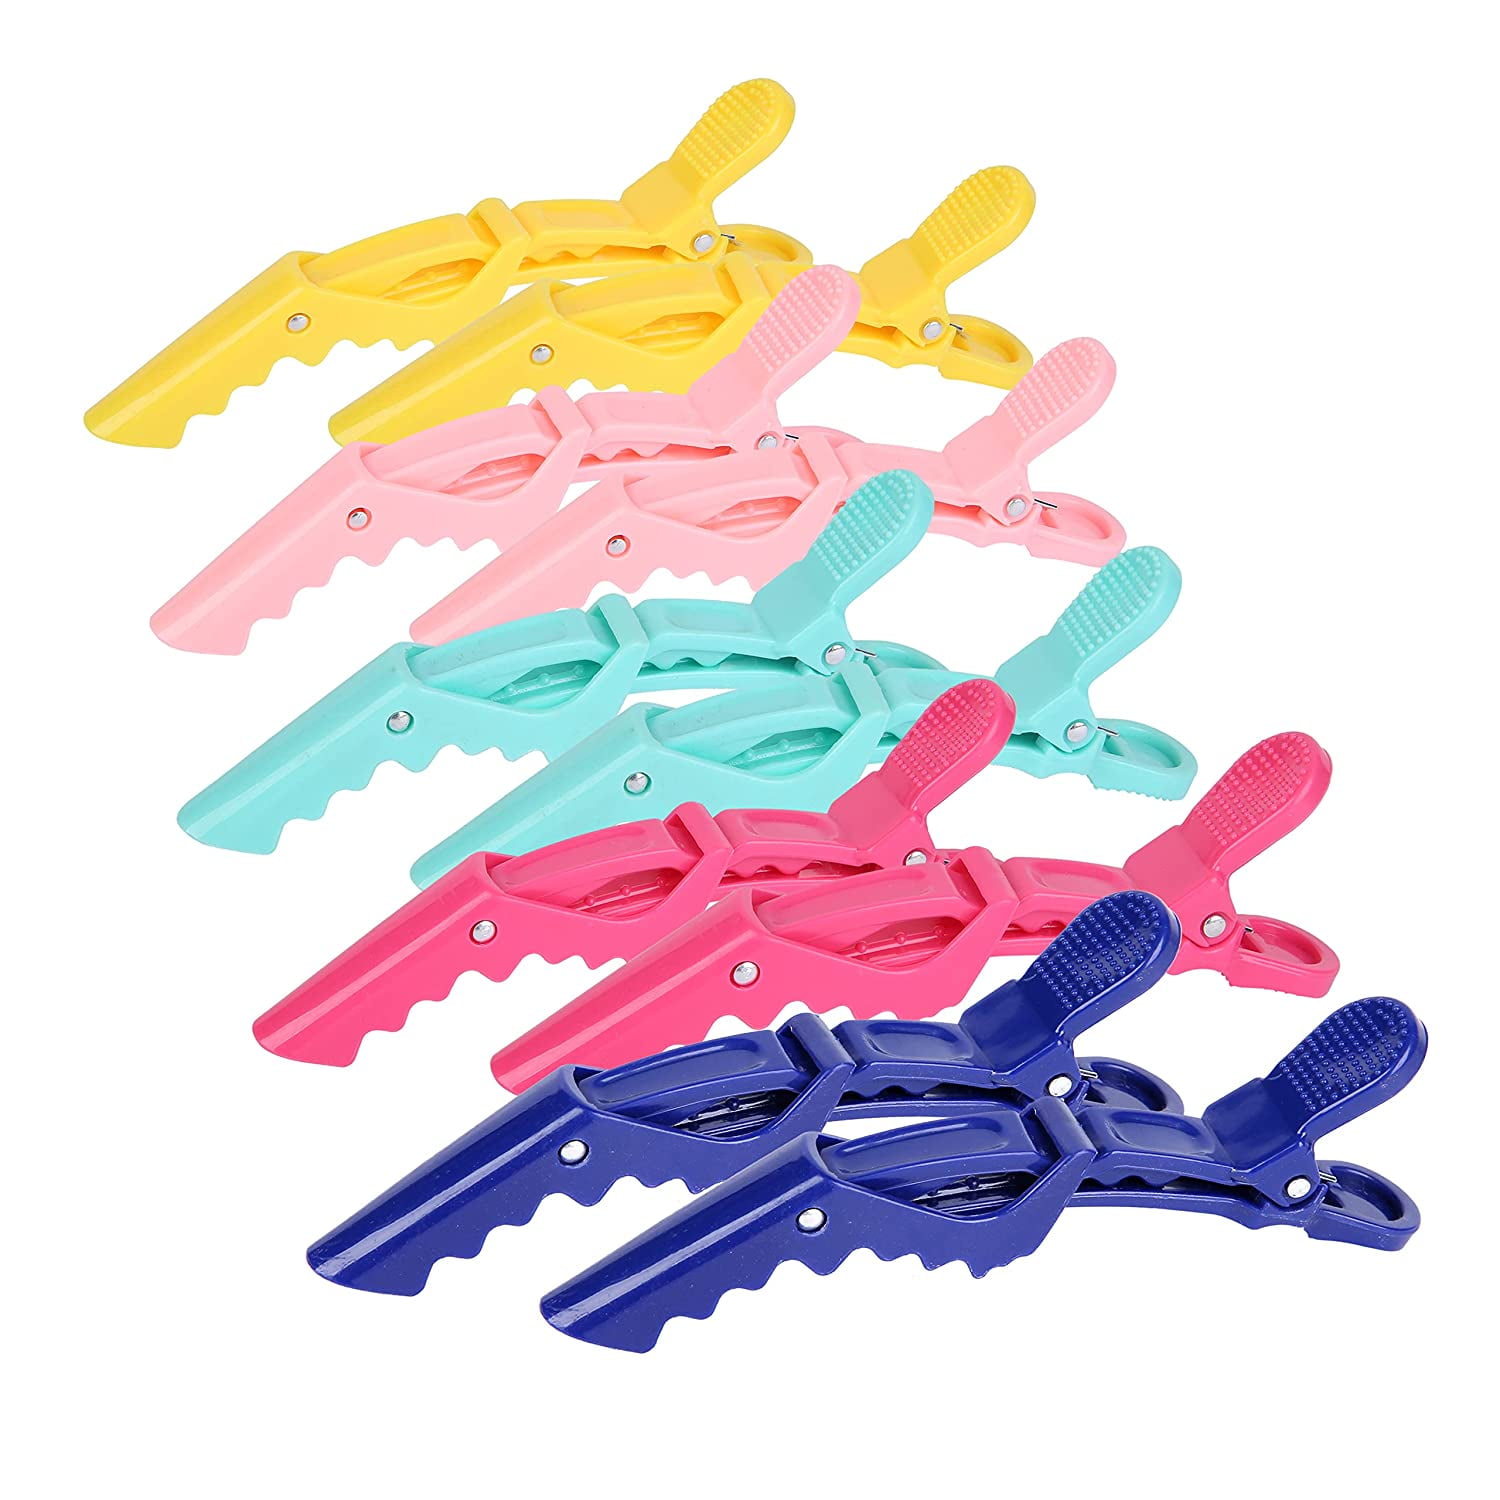 Hair Clips for Women by \u2013 Wide Teeth & Double-Hinged Design \u2013  Alligator Styling Sectioning Clips of Professional Hair Salon Quality -  10Pack (Mixed Candy) 